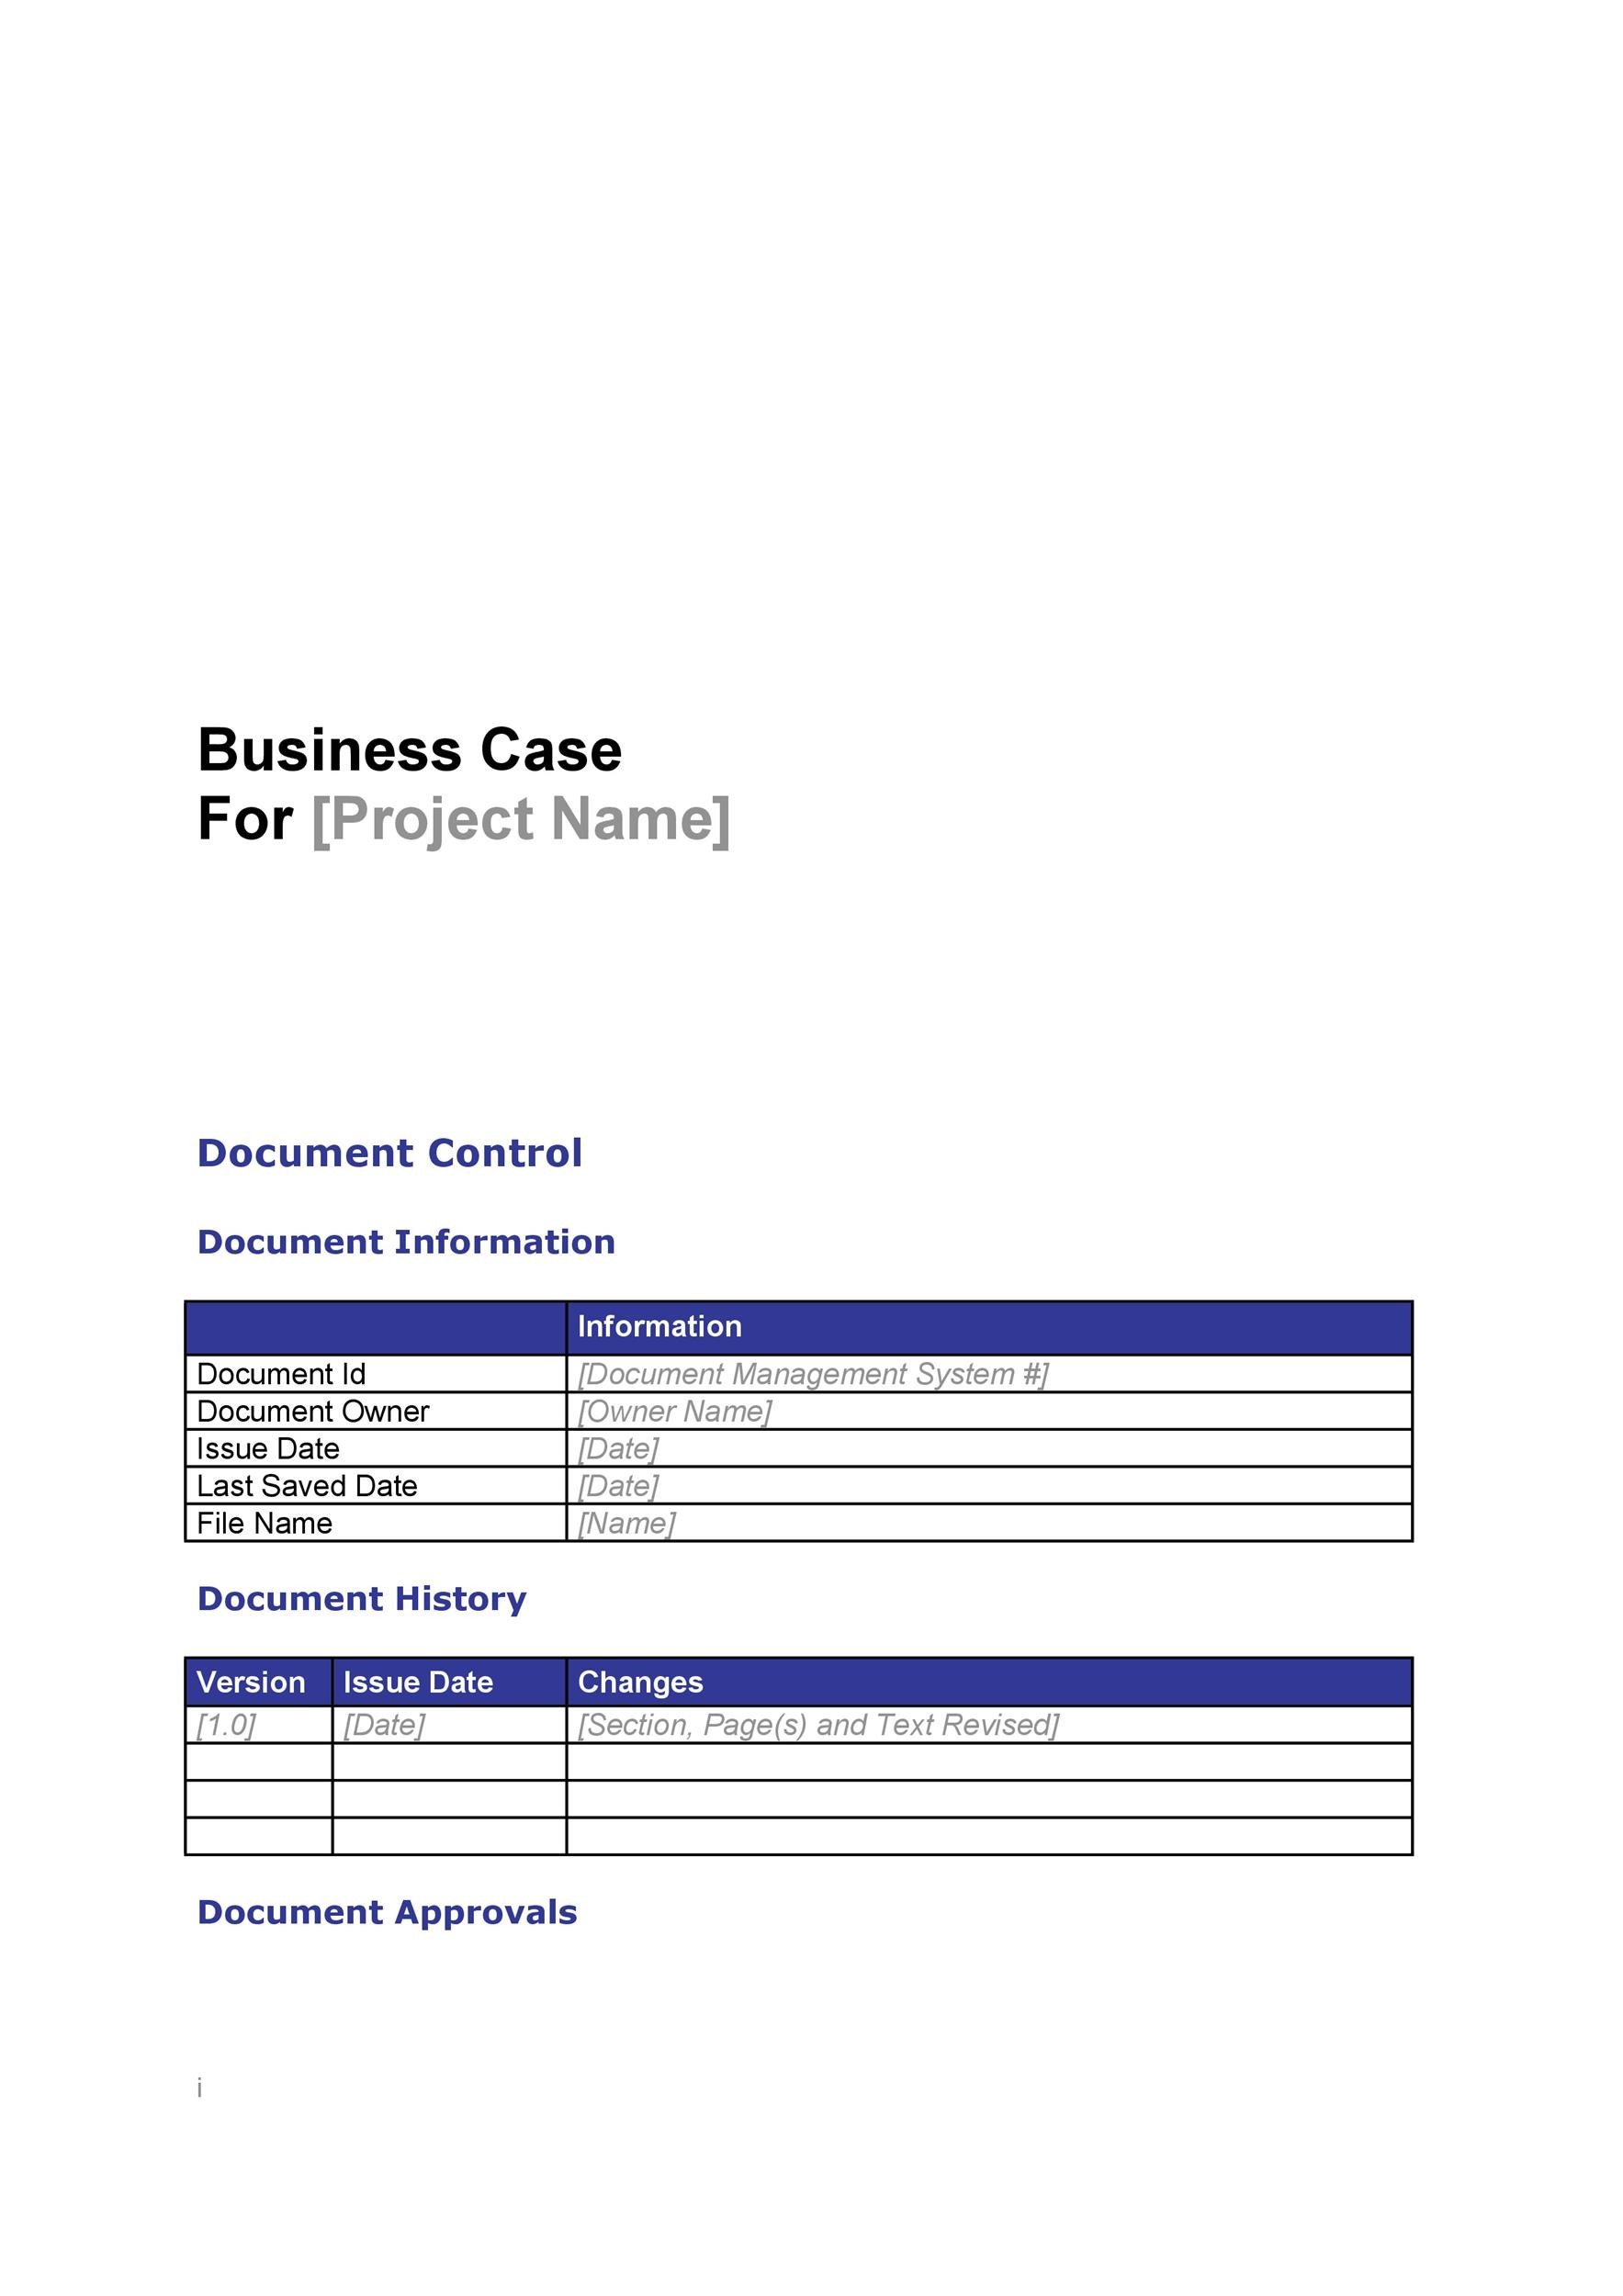 30  Simple Business Case Templates Examples ᐅ TemplateLab